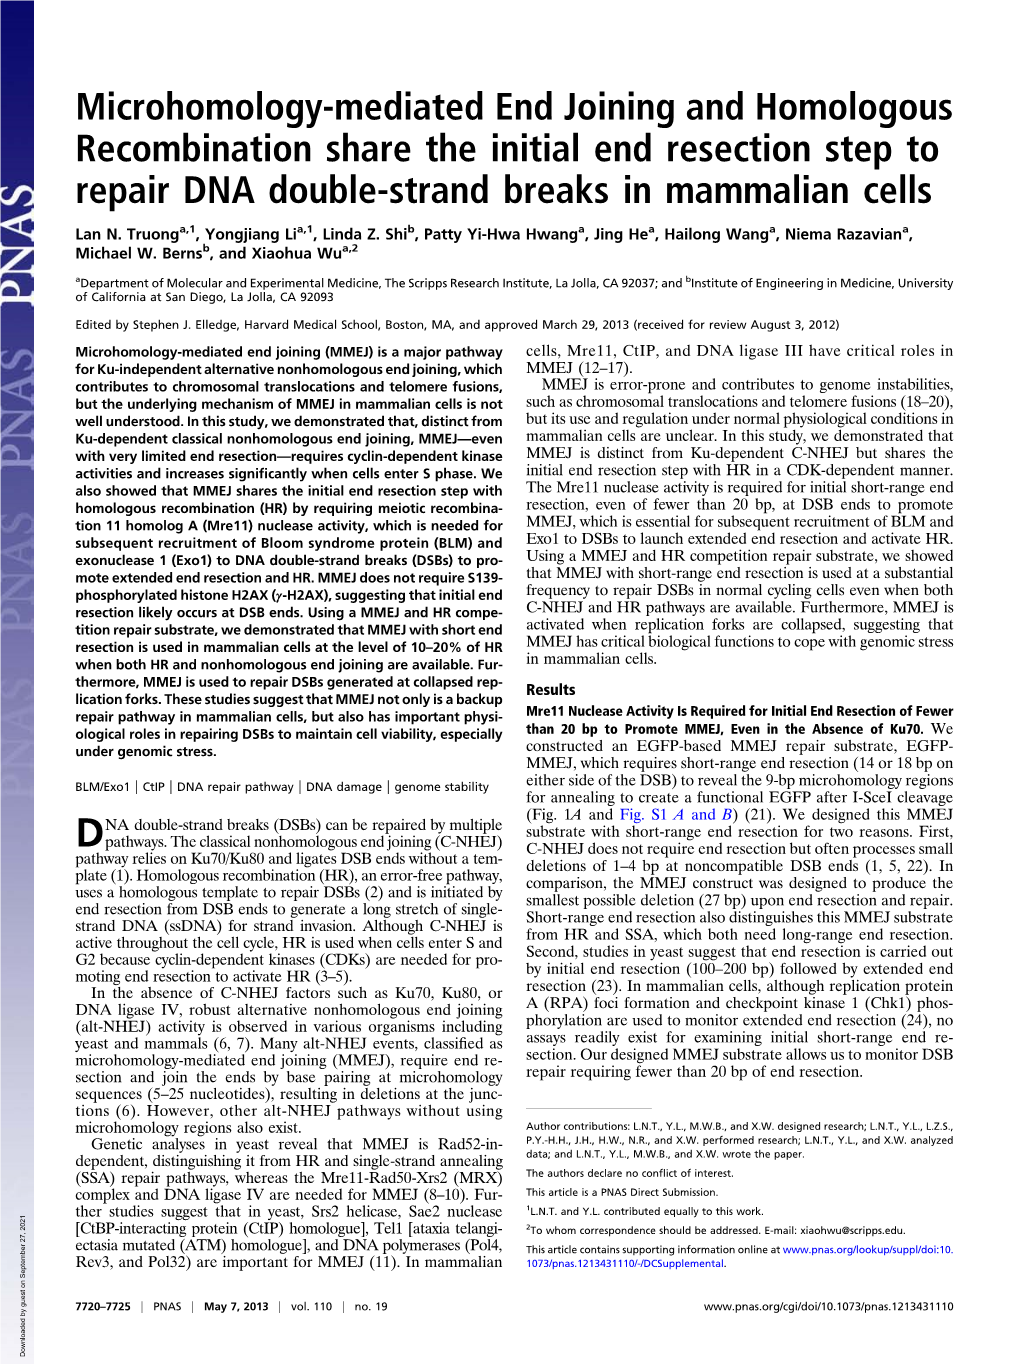 Microhomology-Mediated End Joining and Homologous Recombination Share the Initial End Resection Step to Repair DNA Double-Strand Breaks in Mammalian Cells